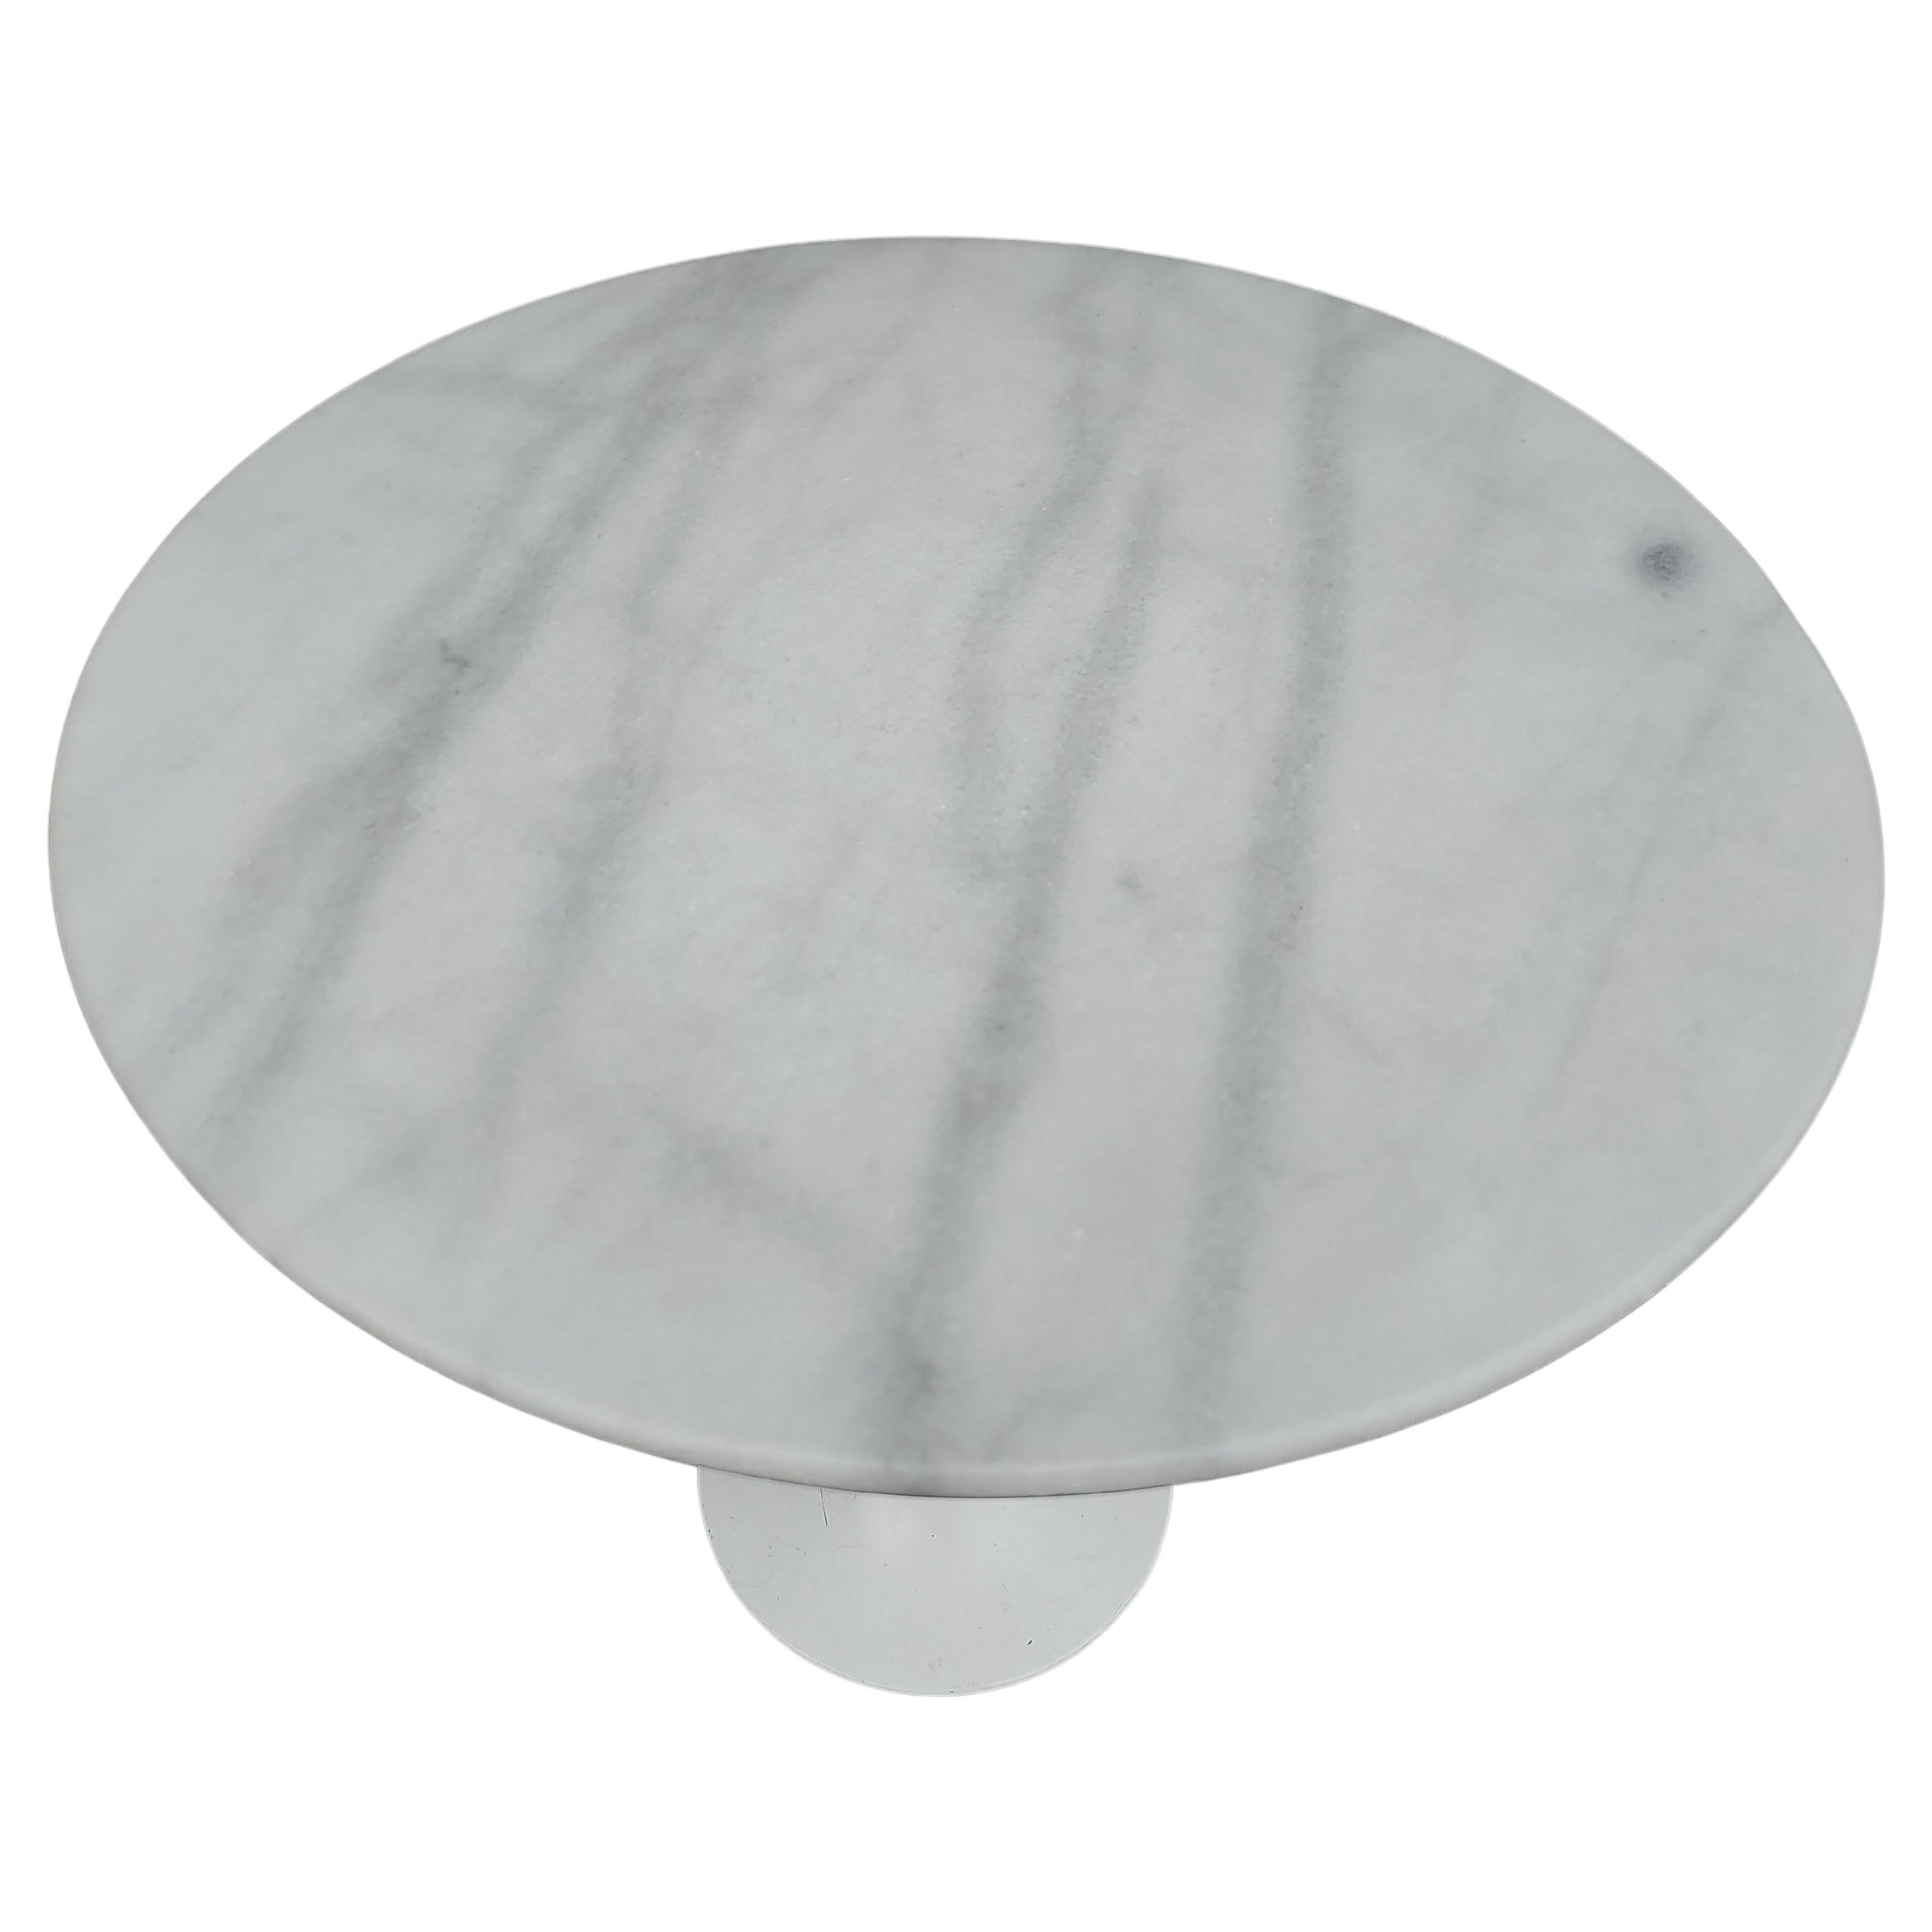 Hand-Crafted Marble Top Tulip Saarinen Style Side Table For Sale